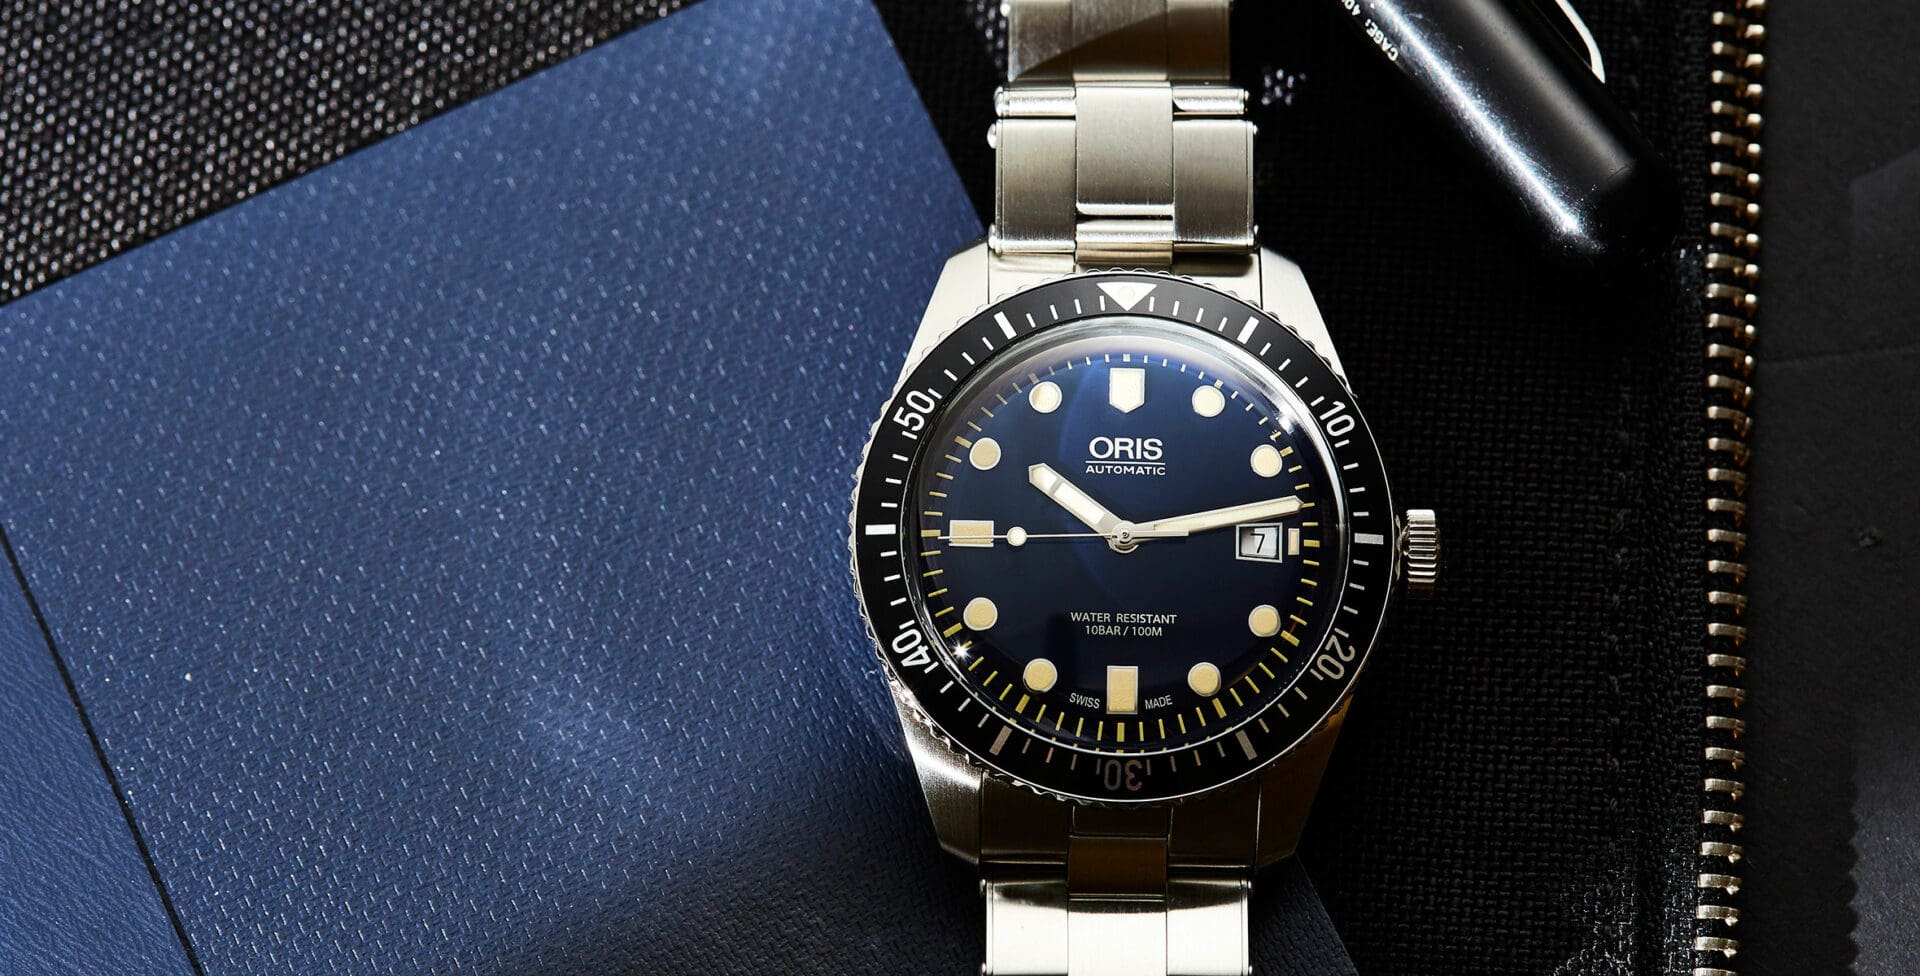 IN-DEPTH: Is this the best heritage watch of 2016? The Oris Divers Sixty-Five 42mm